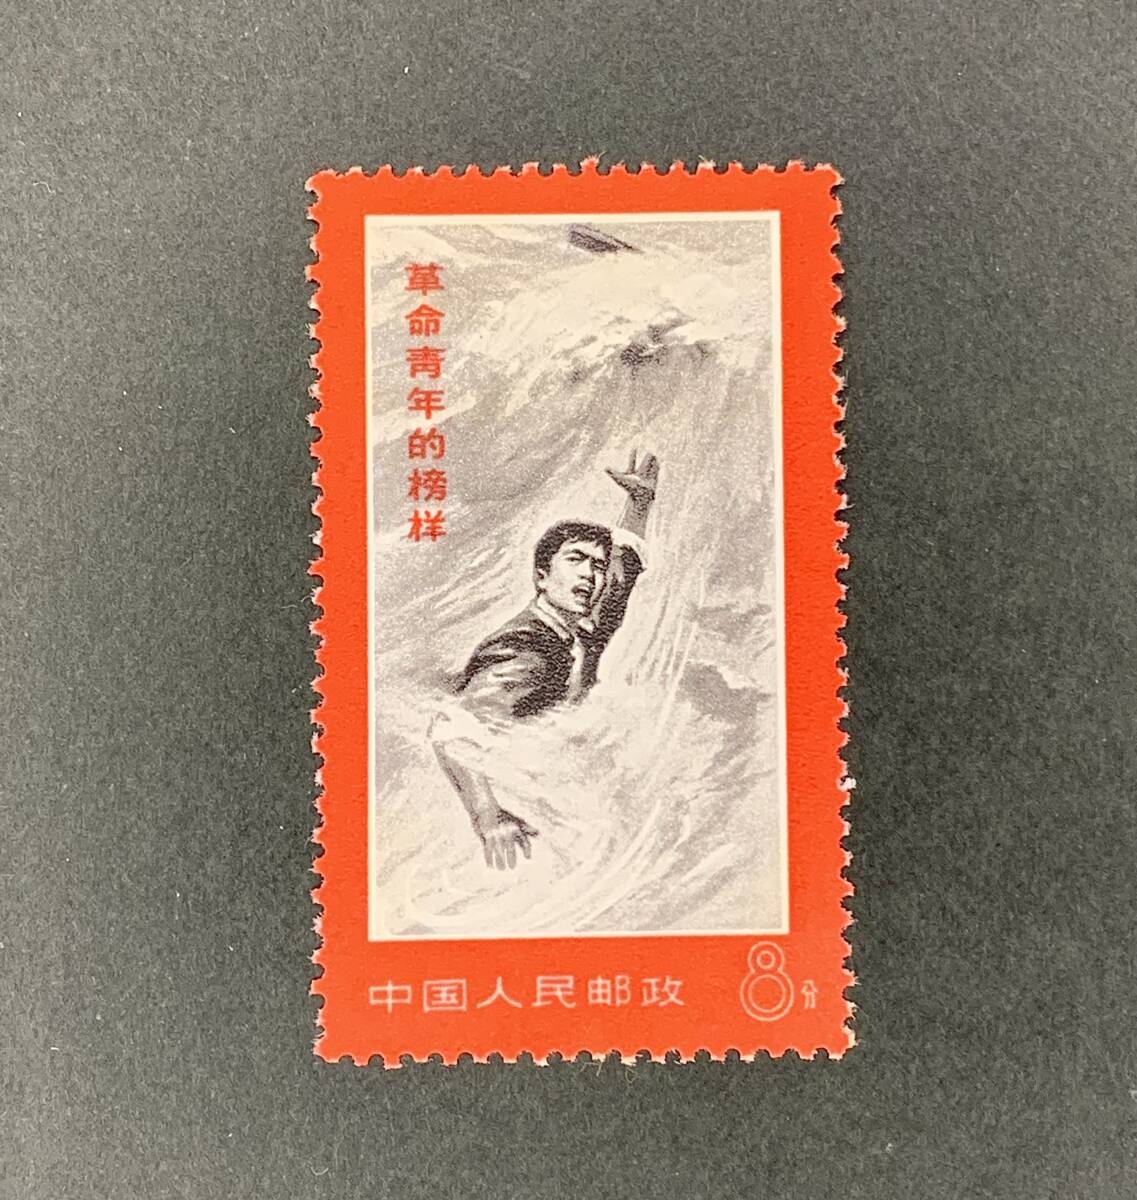  China stamp * unused * writing 19/ writing 20 revolution youth. .. side ....1970 year all sorts .